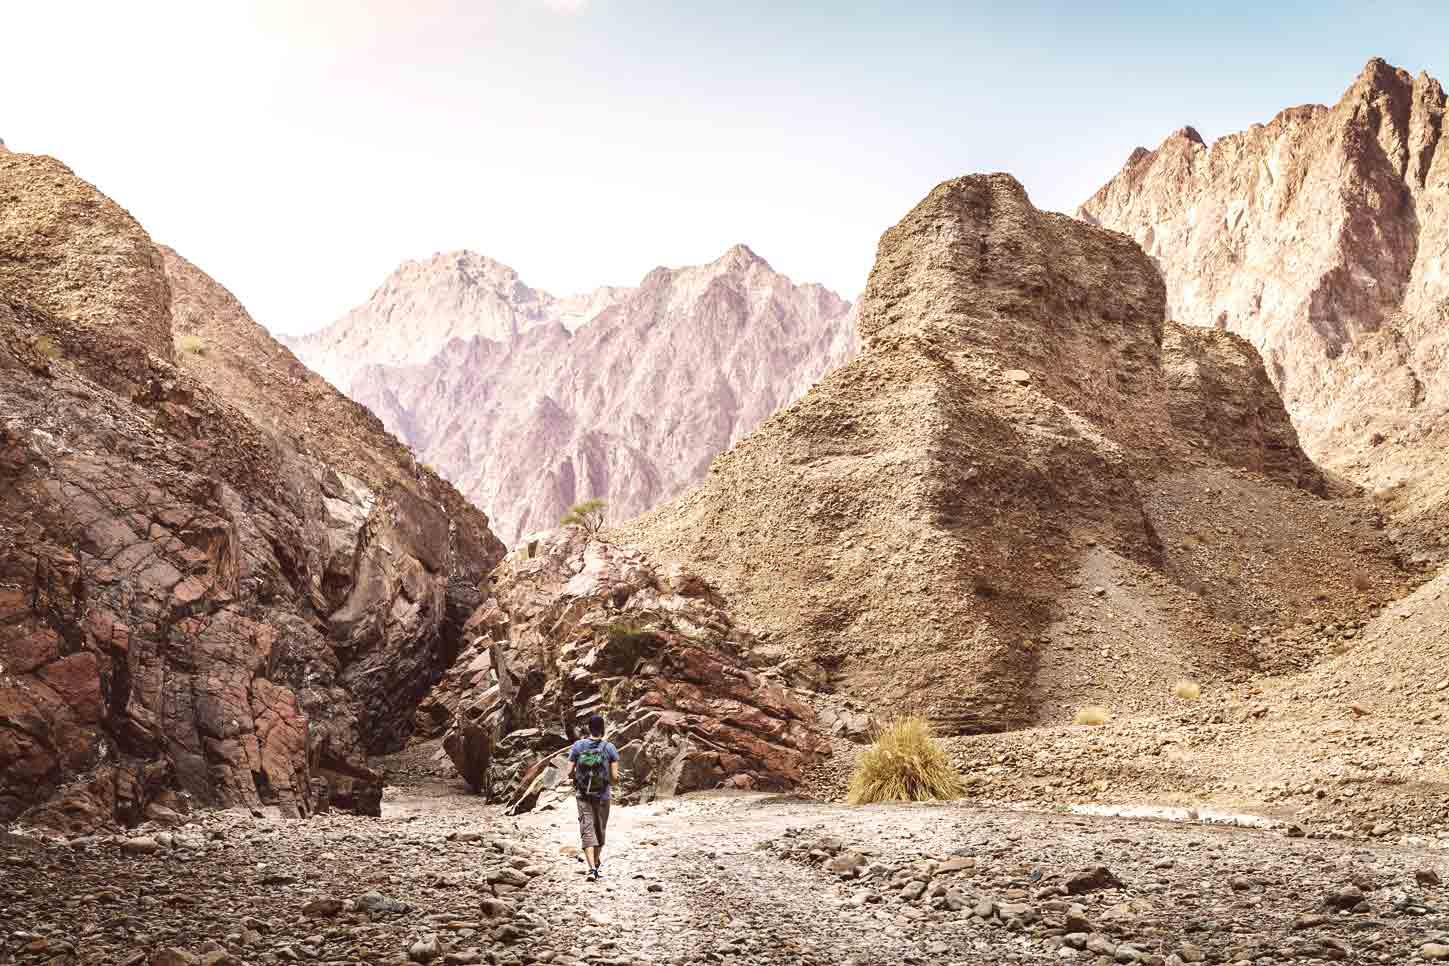 One of the best places to visit near Dubai are the Hajar mountains